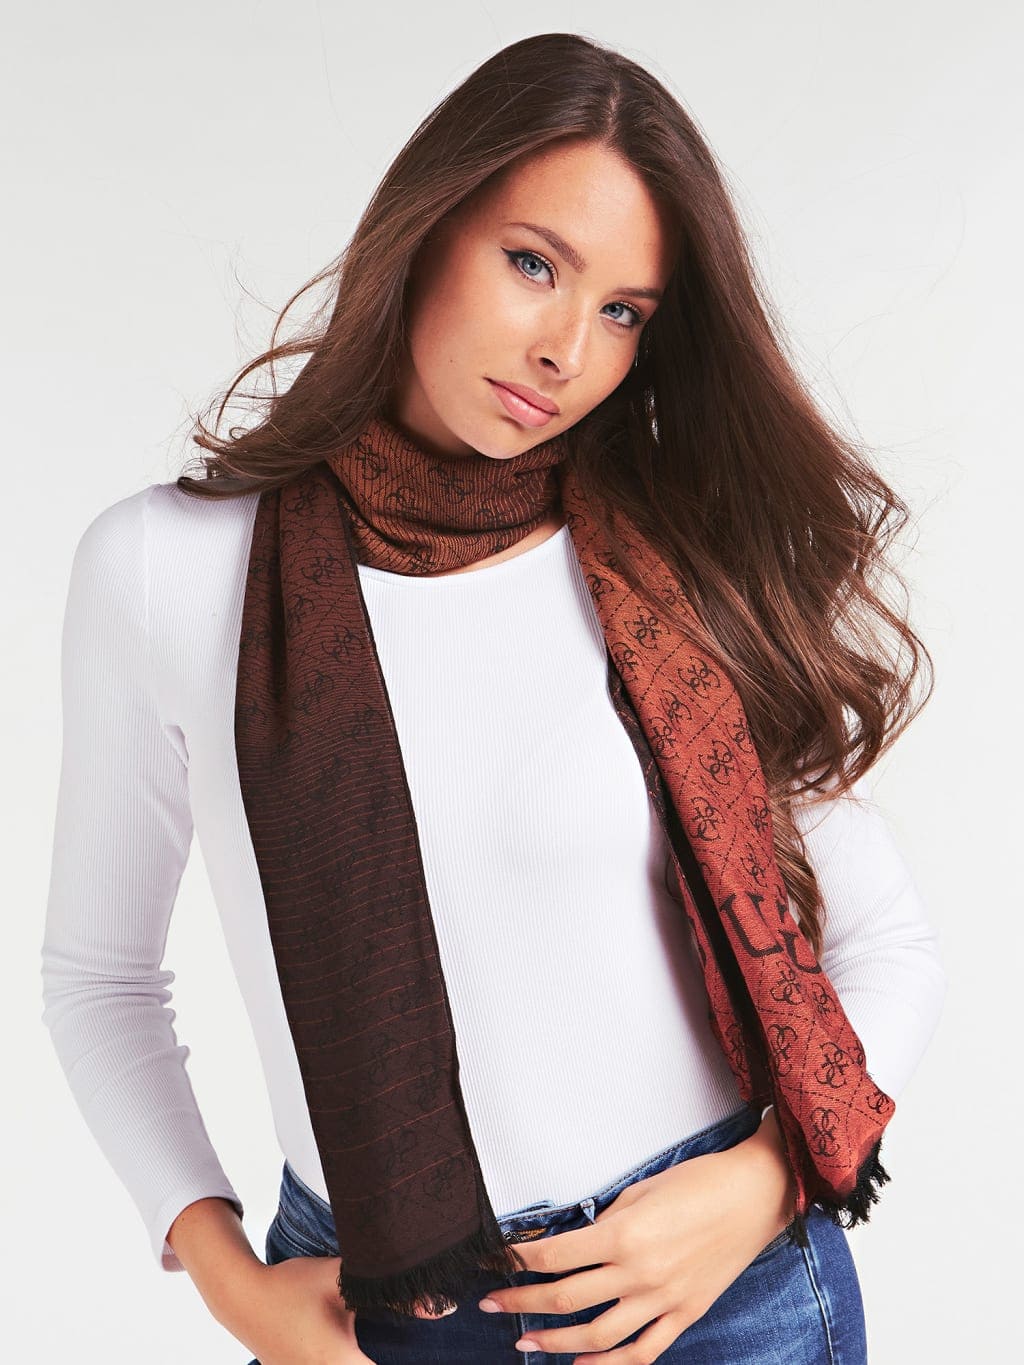 Guess Valy Jacquard Scarf- Brown